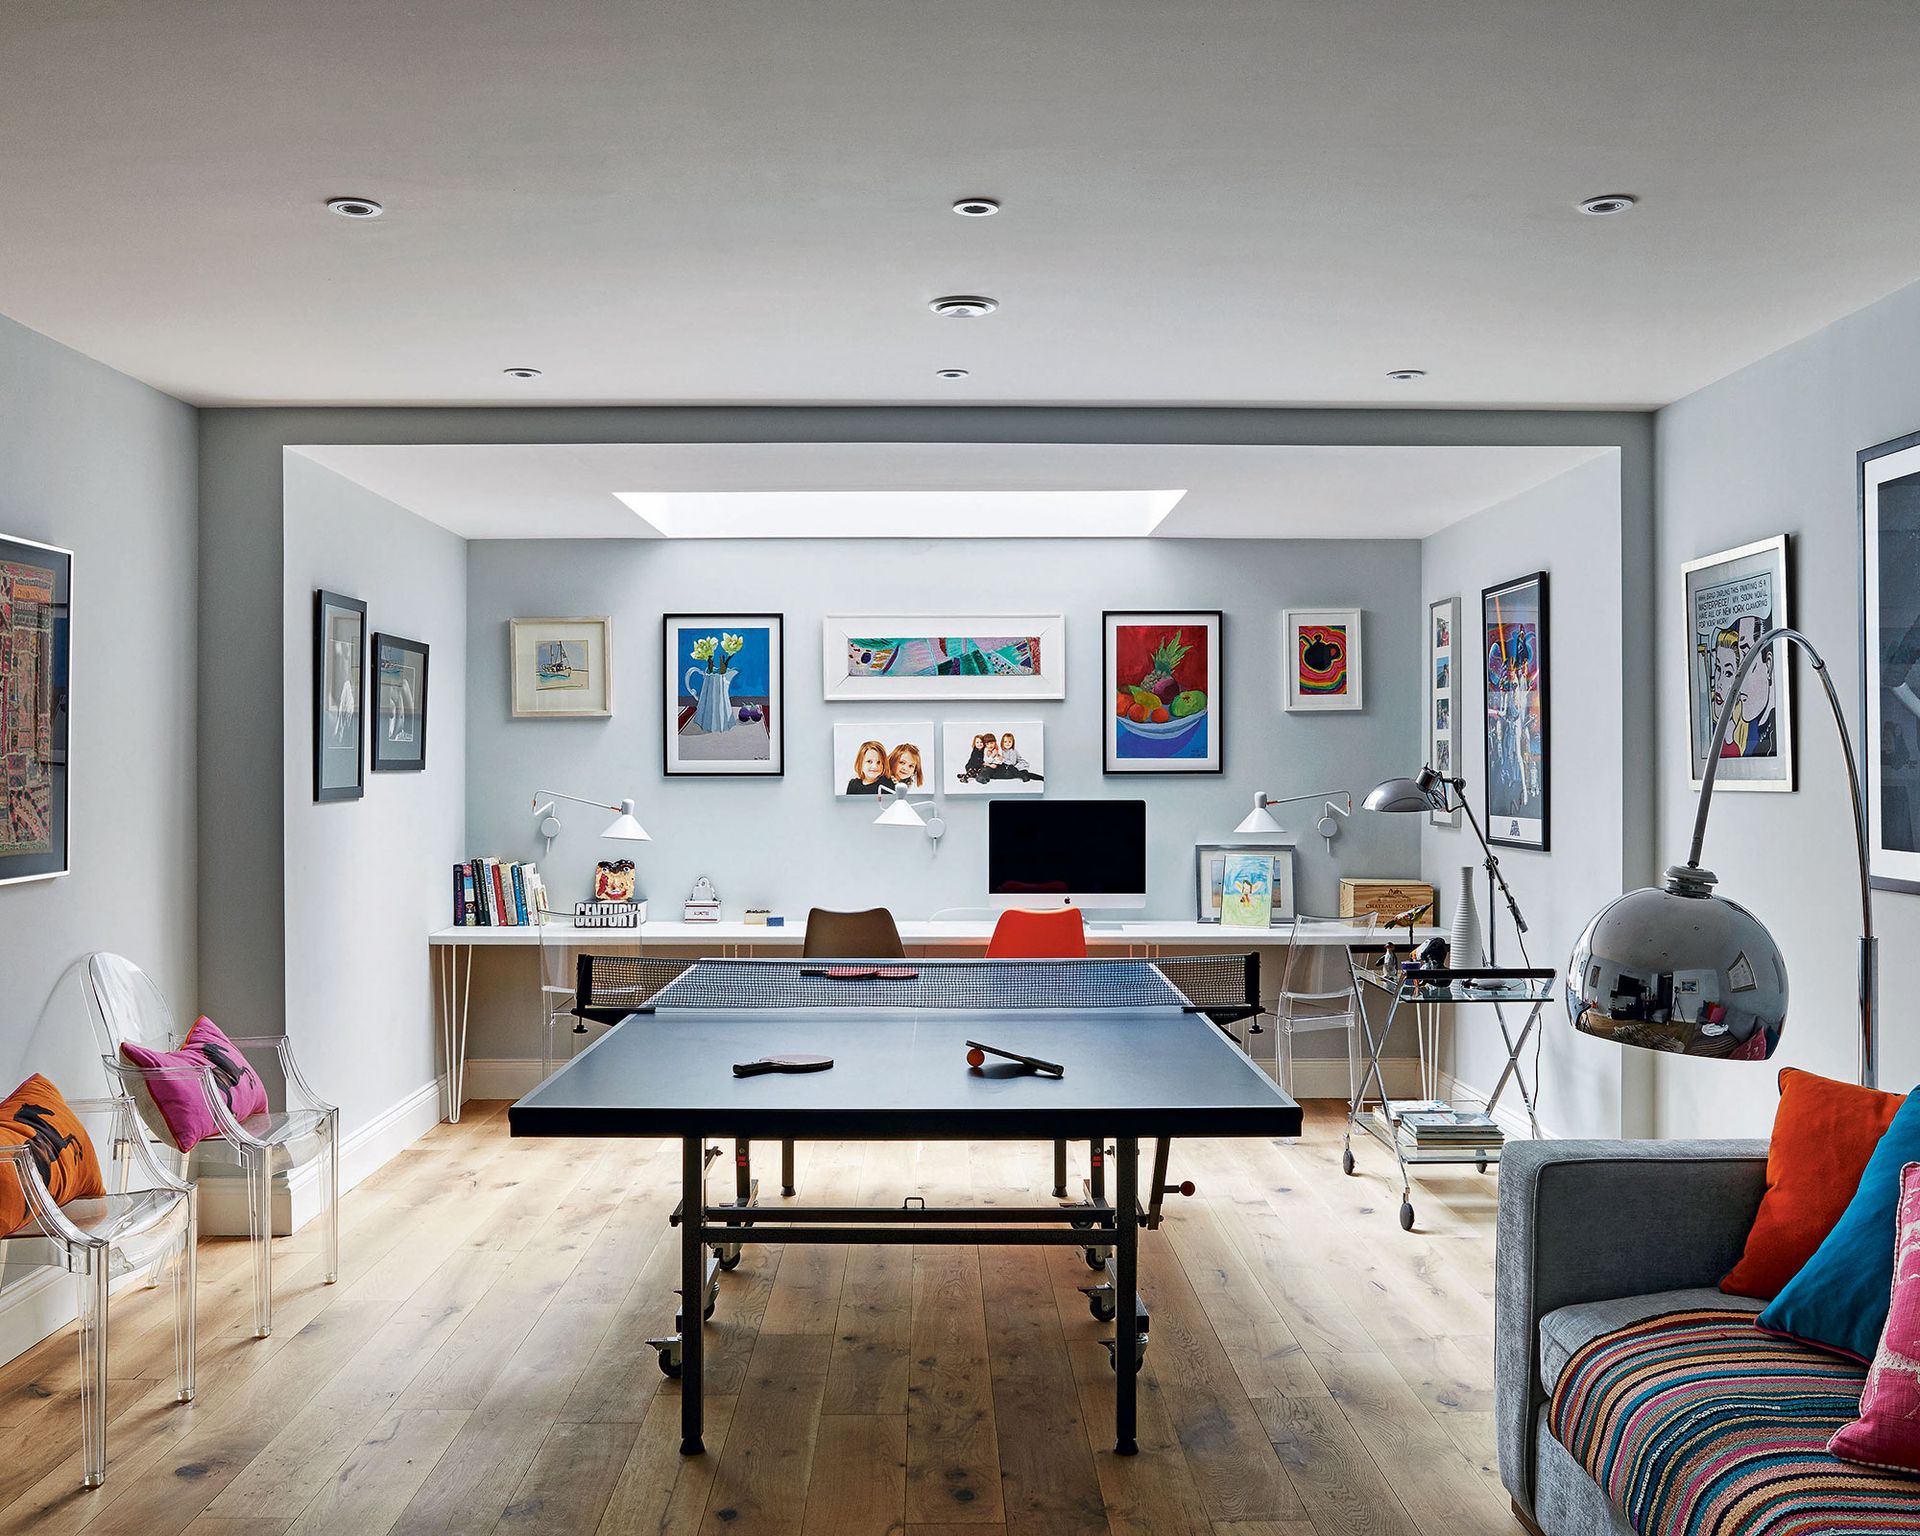 <p>                     'As they get older their needs change, so consider a space that bridges the gap from playroom to young teen. A desk area for school work, but also a place where they can chill out with friends – a sofa bed is a great option for sleepovers,' says Jennifer Ebert, digital editor, <em>Homes & Gardens.</em>                   </p>